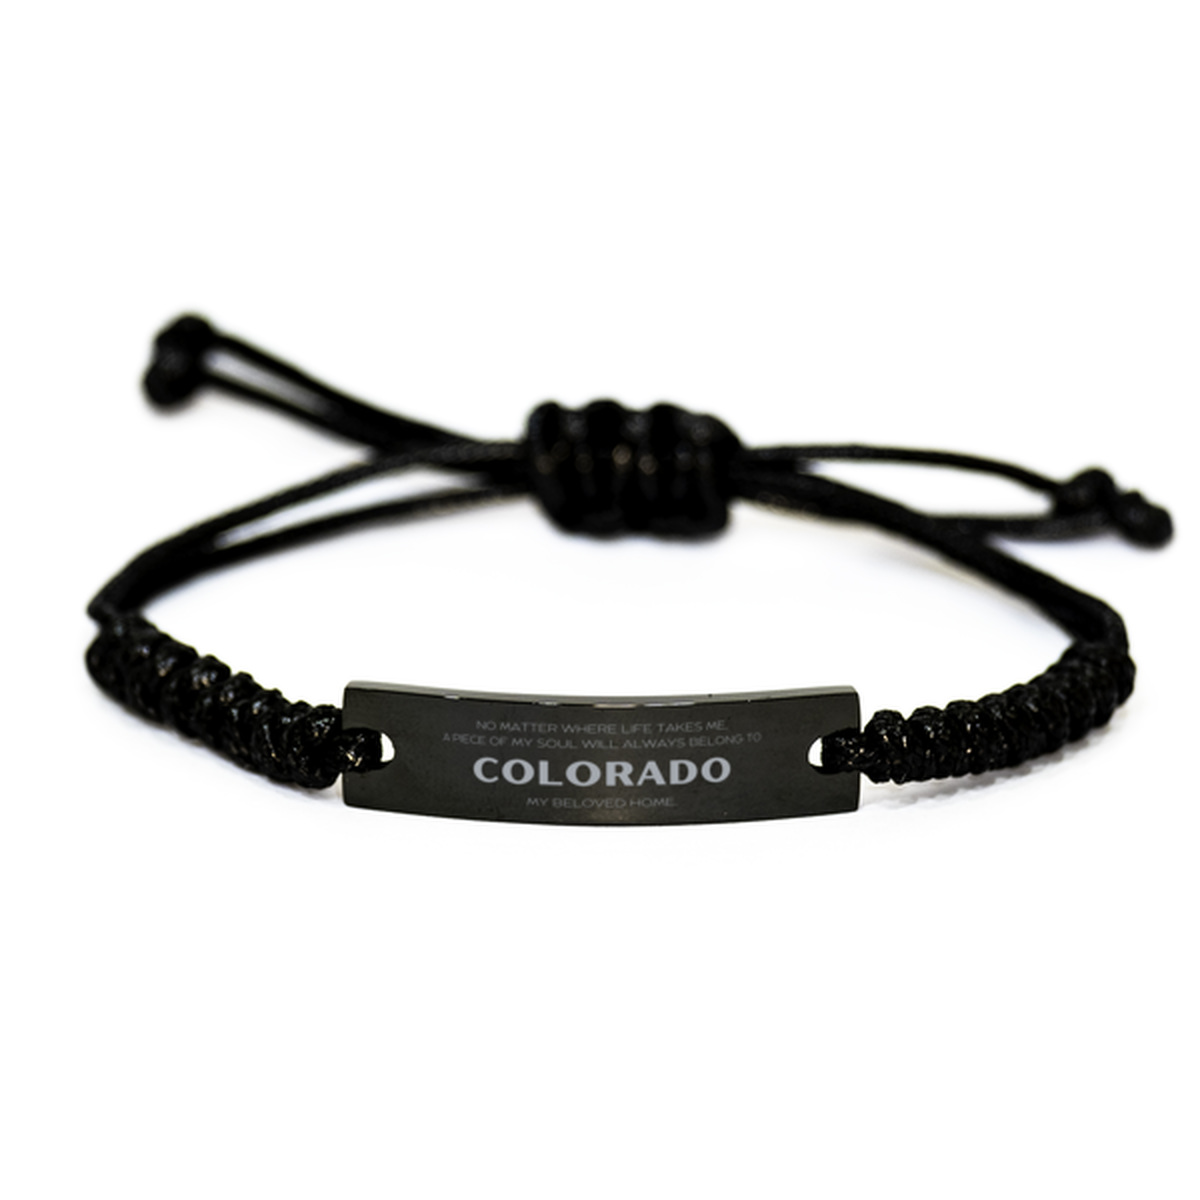 Love Colorado State Gifts, My soul will always belong to Colorado, Proud Black Rope Bracelet, Birthday Unique Gifts For Colorado Men, Women, Friends